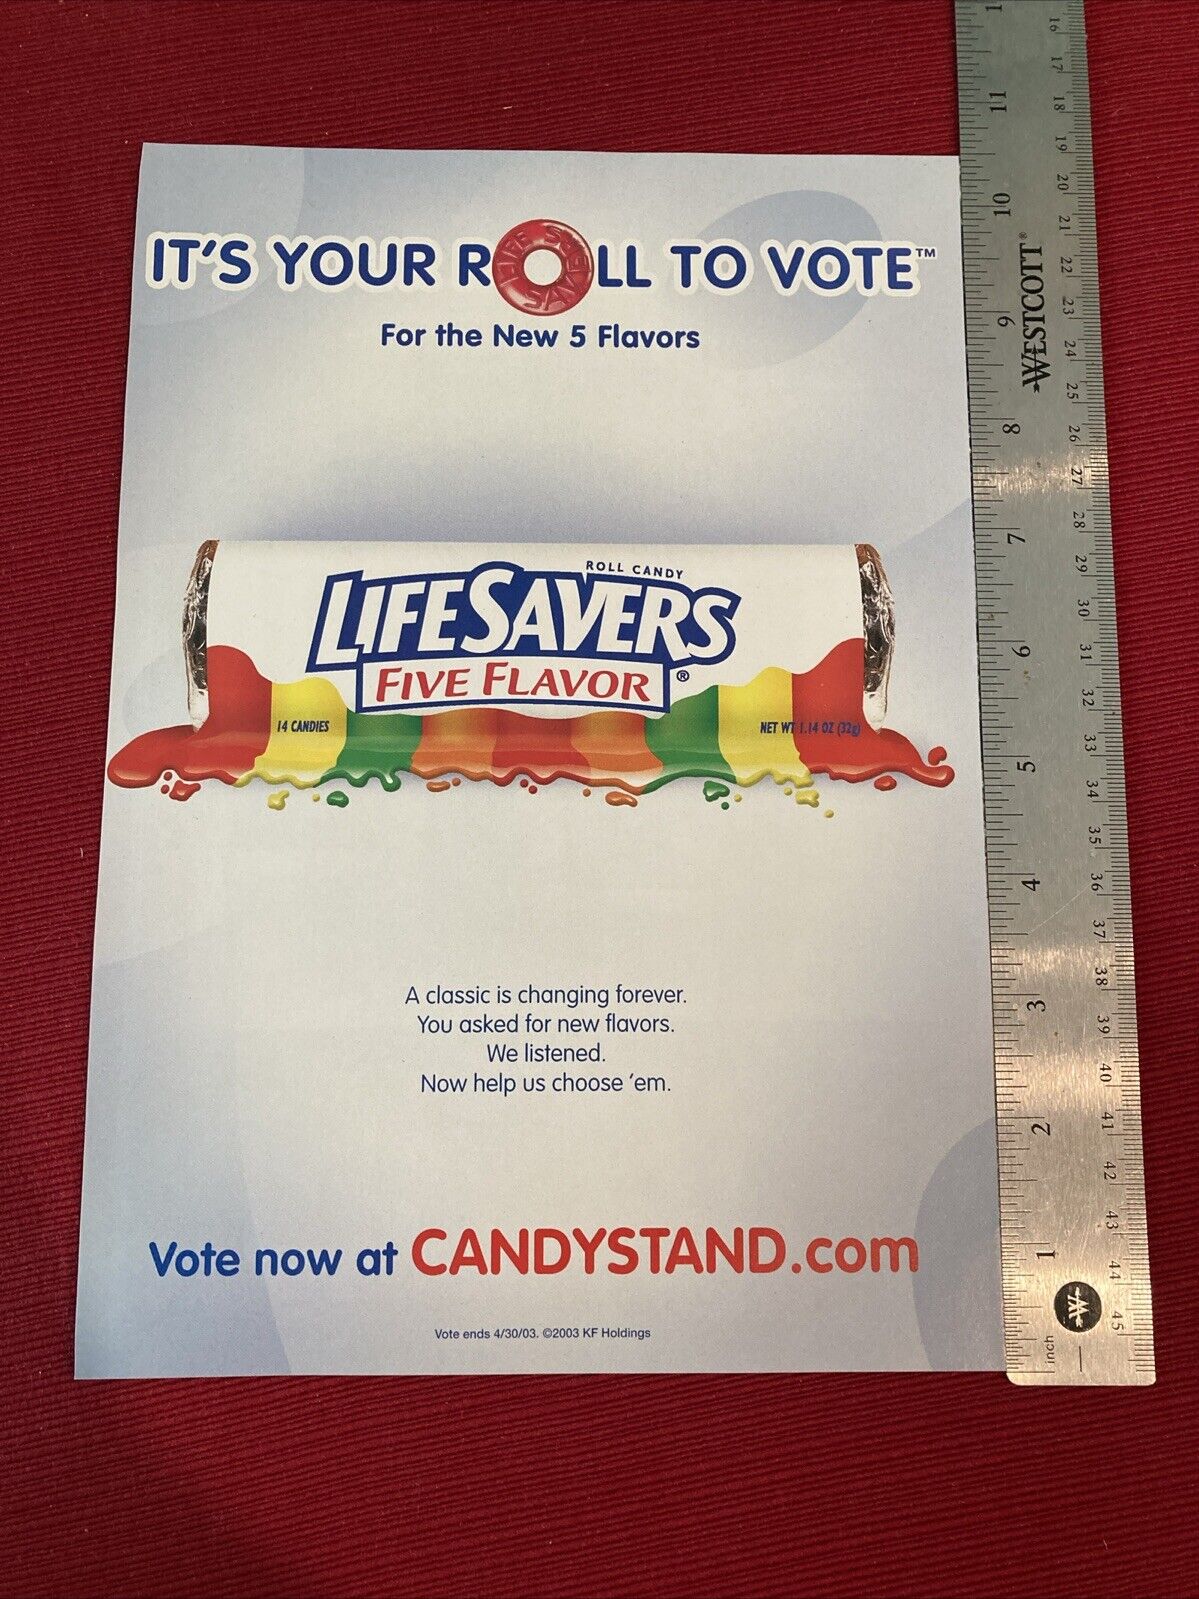 Lifesavers Five Flavor Roll Candy 2003 Print Ad